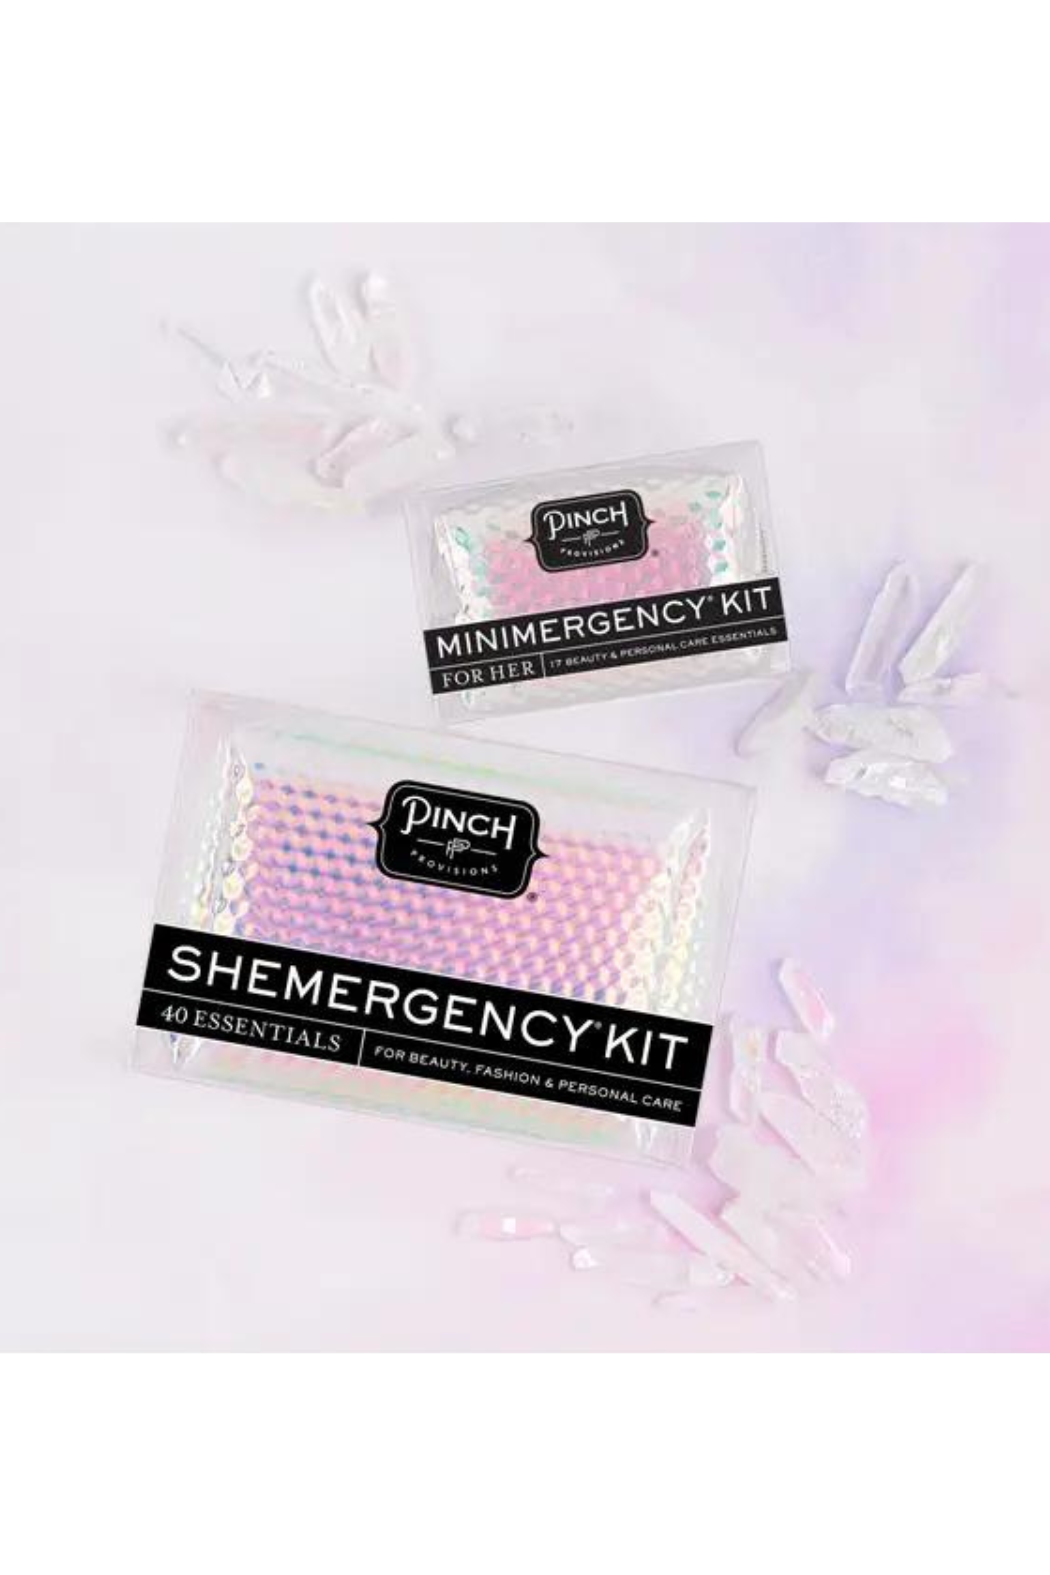 Pinch Provisions Shemergency Survival Kit for Brides in White Glitter Bomb